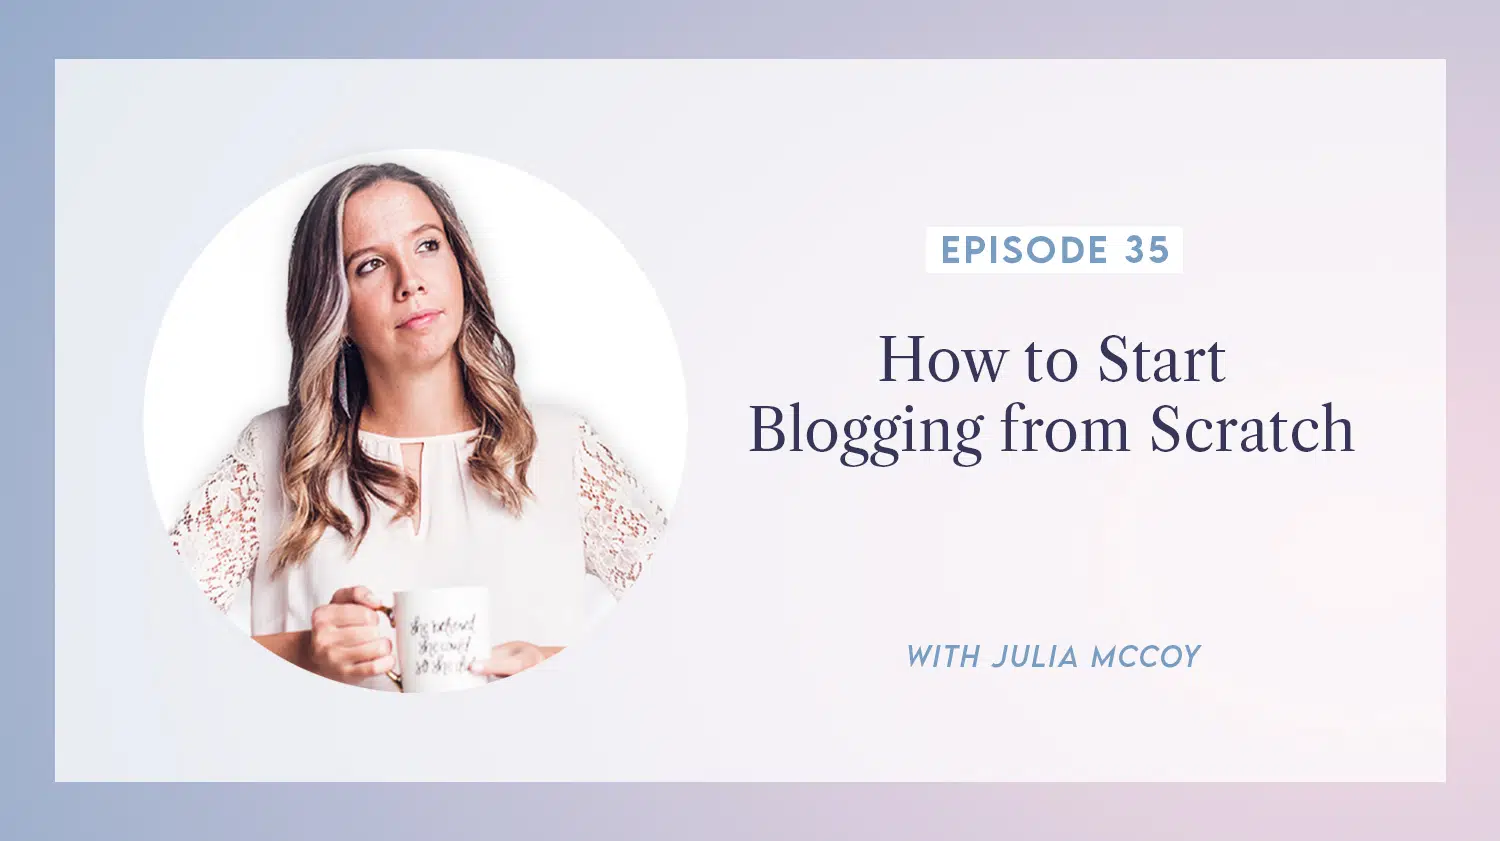 content transformation podcast with julia mccoy episode 35 how to start blogging from scratch